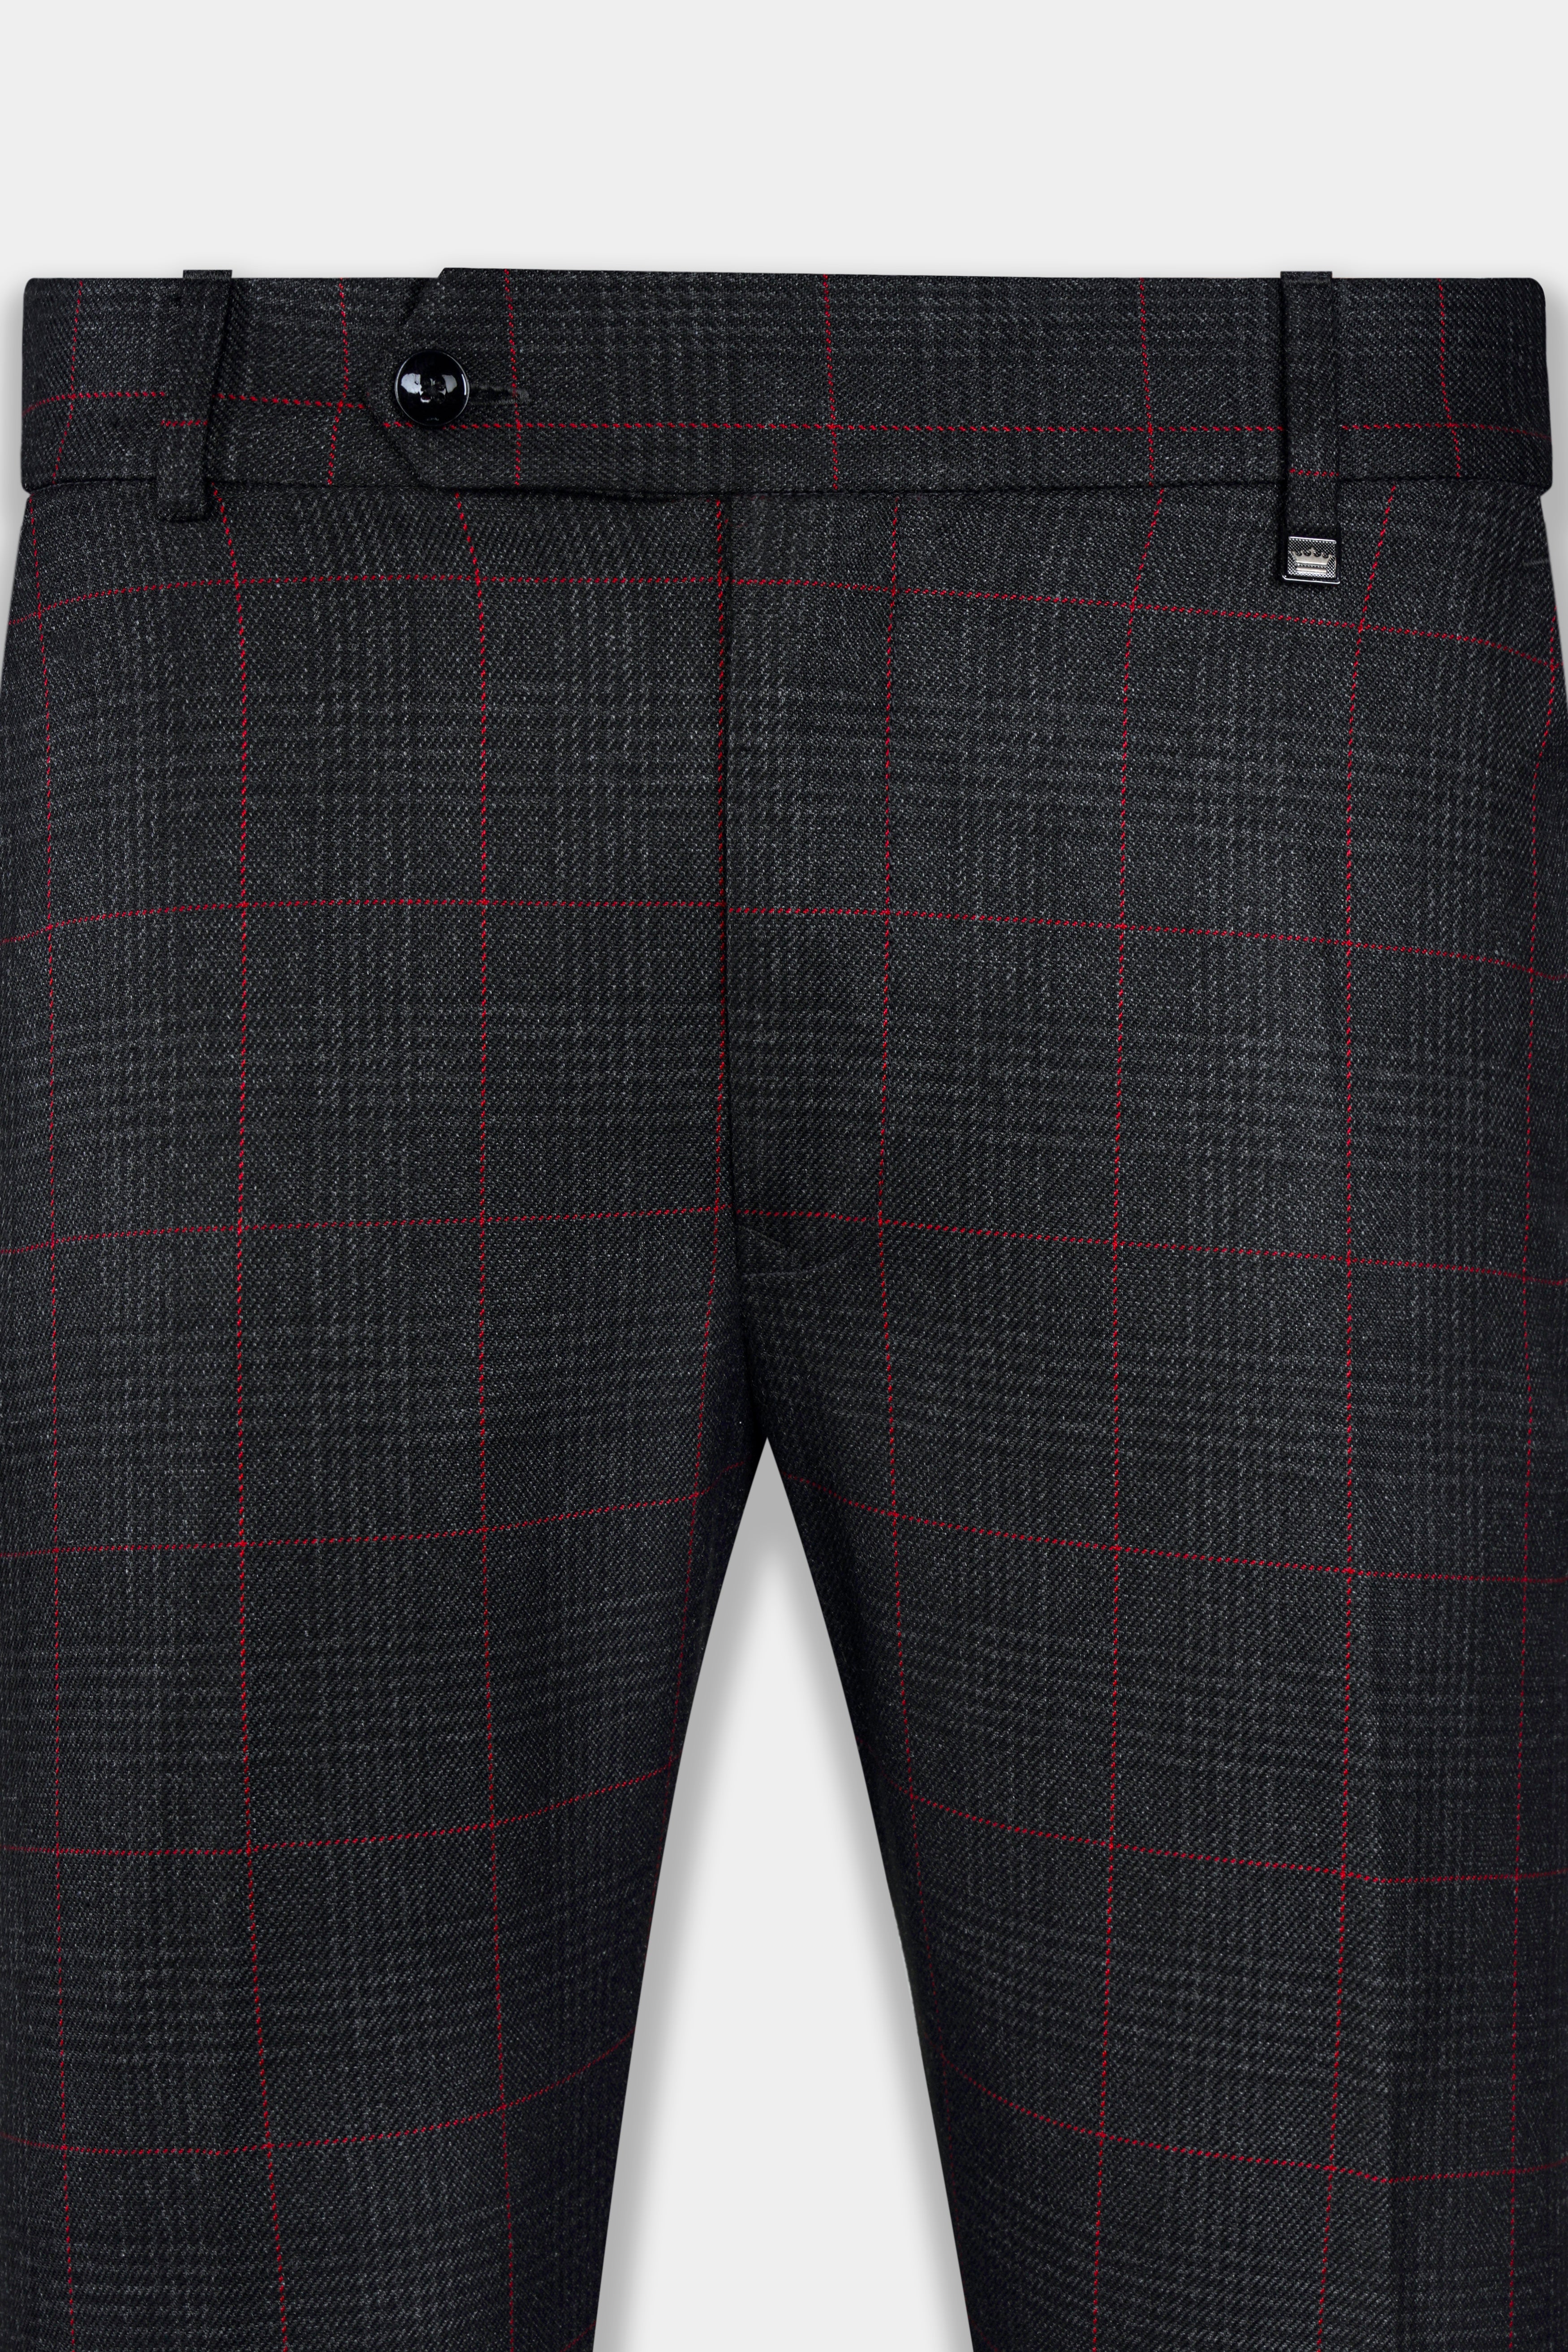 Bunker Black and Maple Red Windowpane Tweed Stretchable Waistband Pant